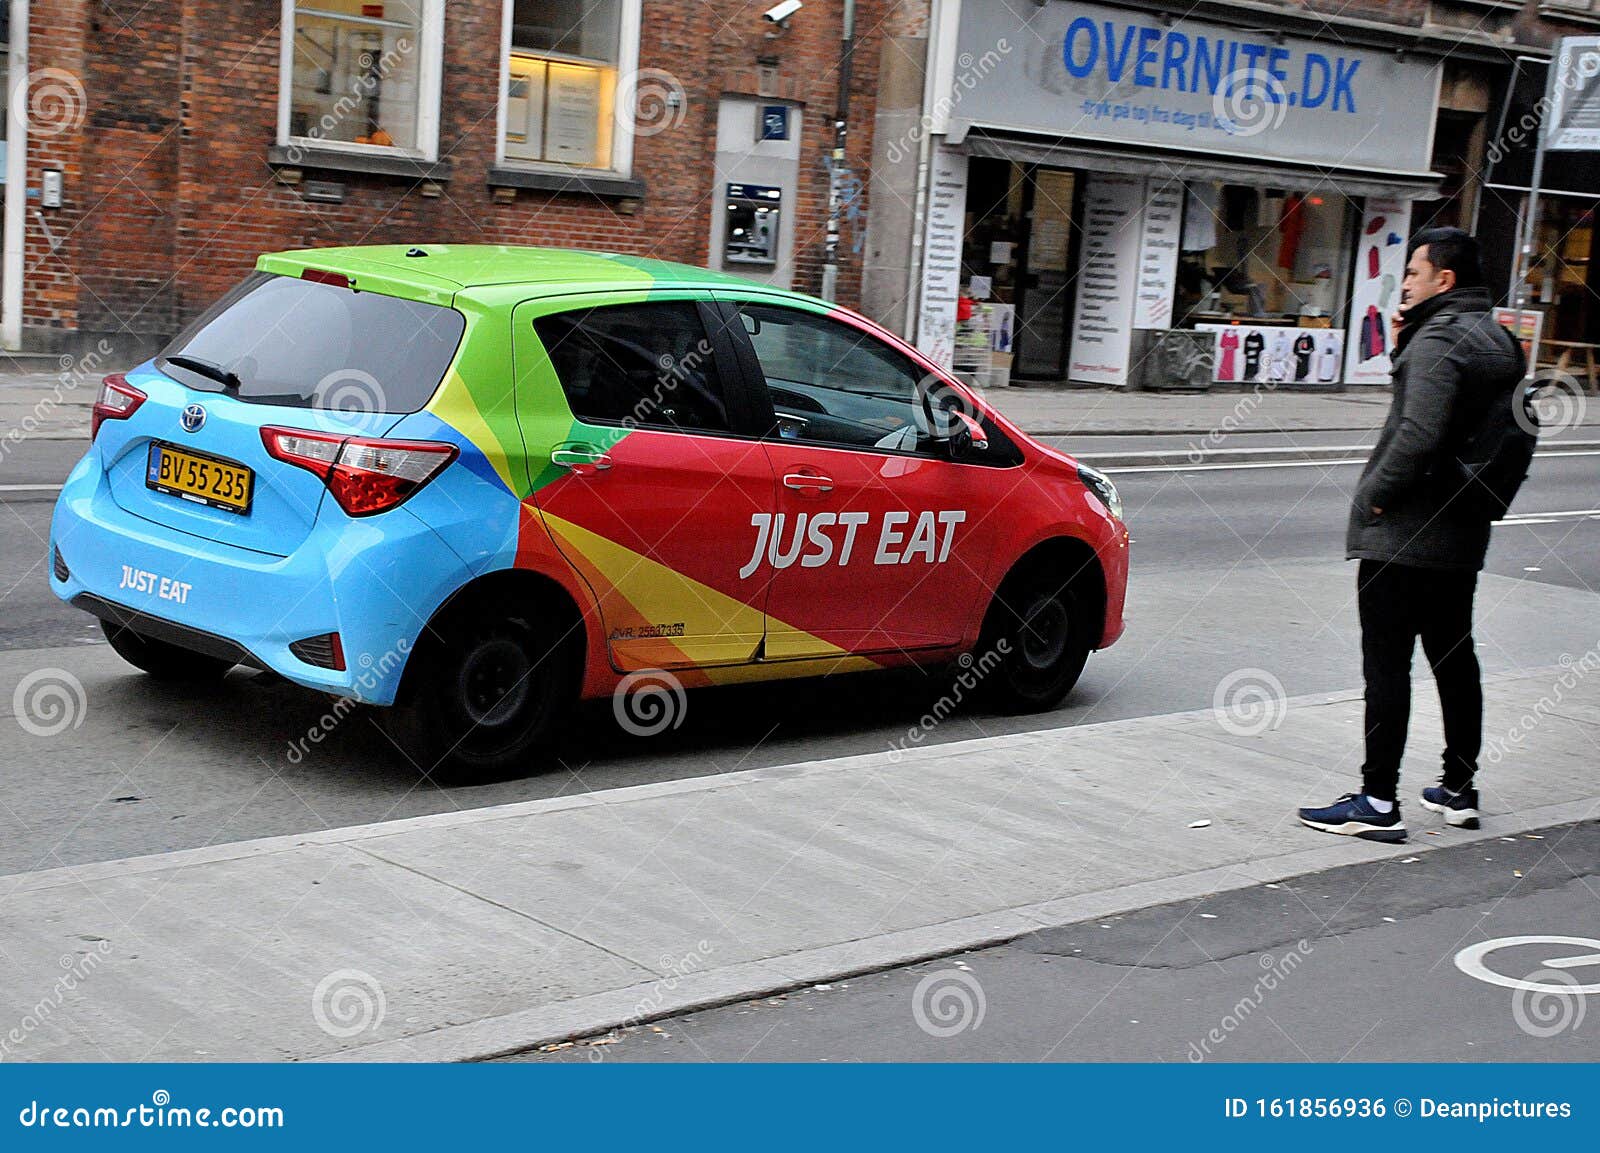 just eat food delivery